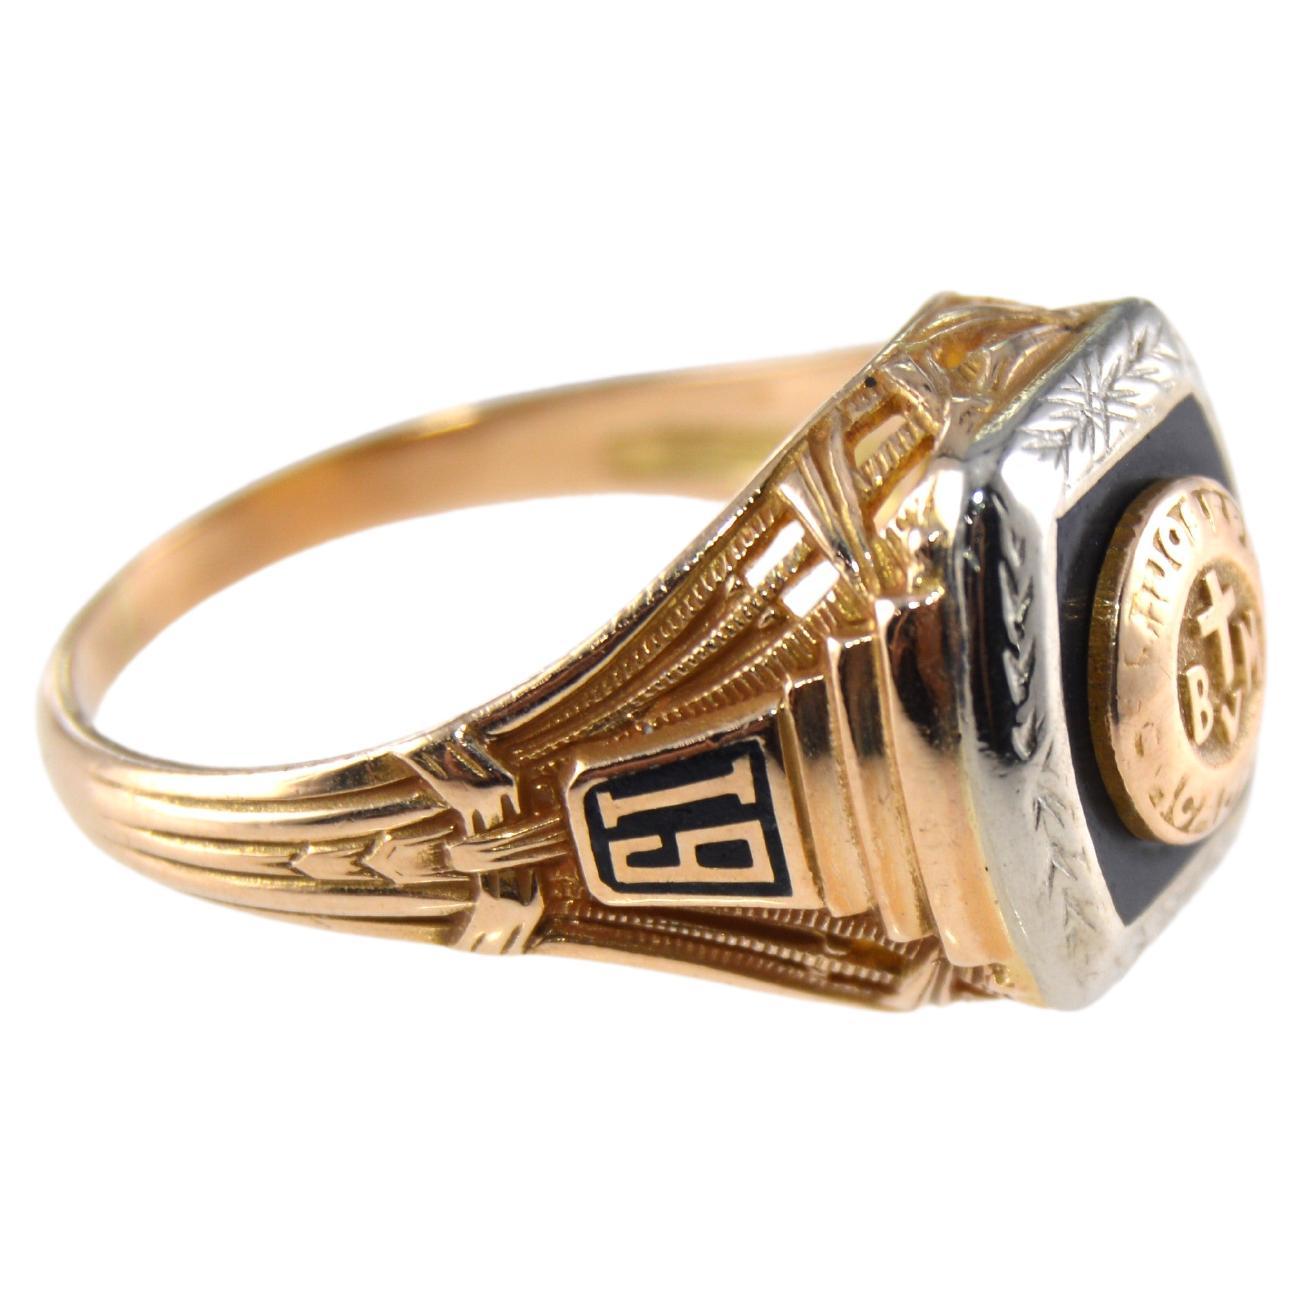 UNISEX RING
STYLE / REFERENCE: Art Deco
METAL / MATERIAL: 10Kt. Solid Gold Multi Colored
CIRCA / YEAR: 1931 
SIZE: 5.5

This charming looking ring is entirely hand constructed in two tone gold with an onyx stone inlay. It is hand engraved and unique